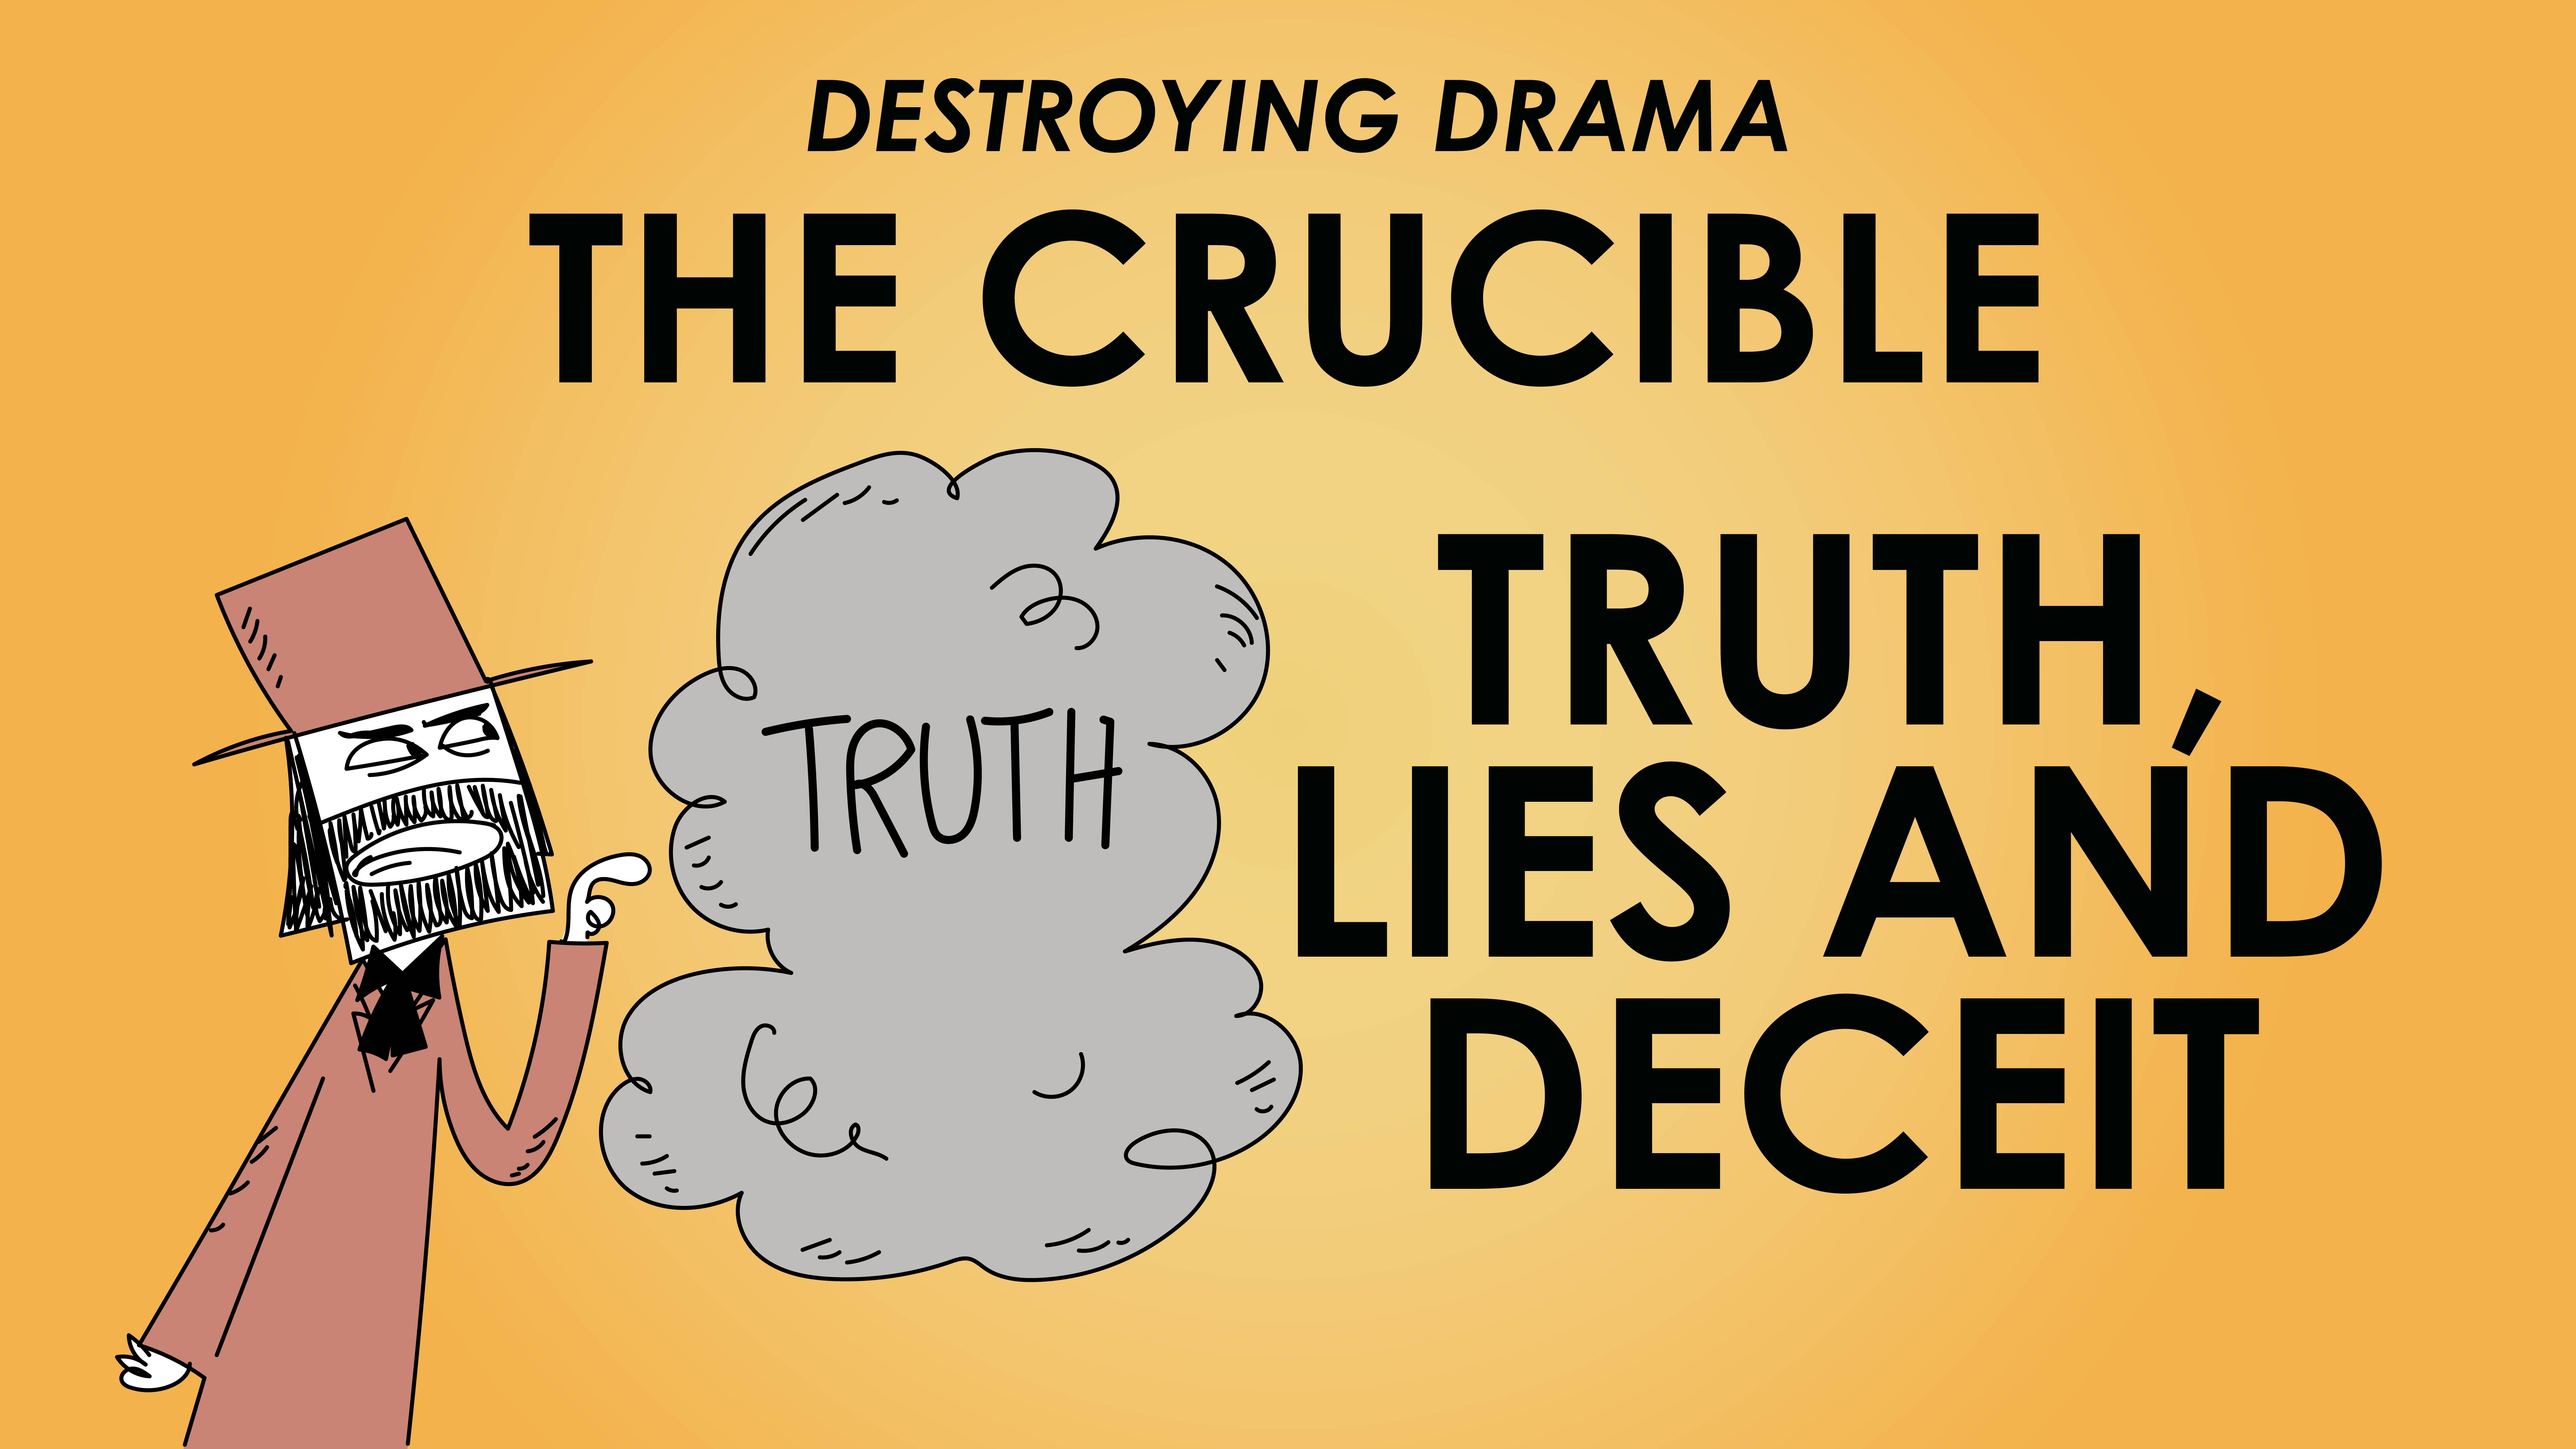 The Crucible - Arthur Miller - Theme of Truth, Lies and Deceit - Destroying Drama Series